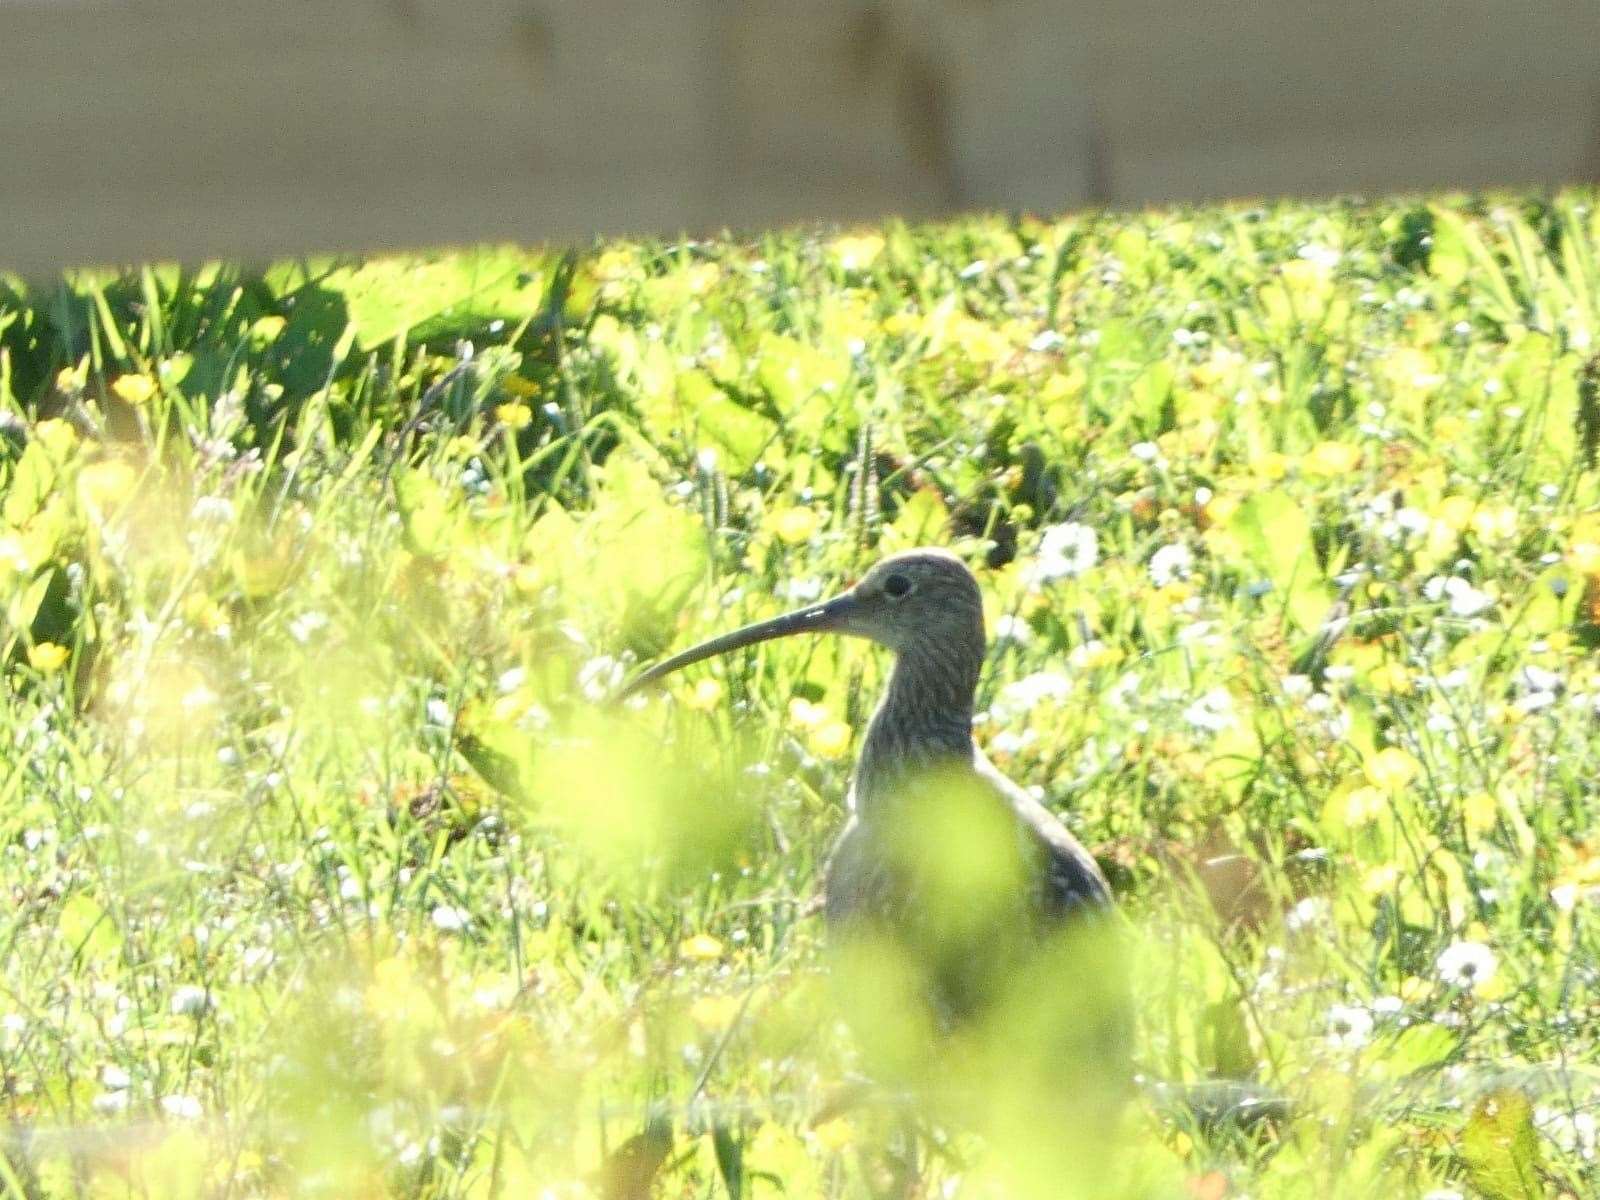 A curlew pictured at Occumster by Bev Haston.